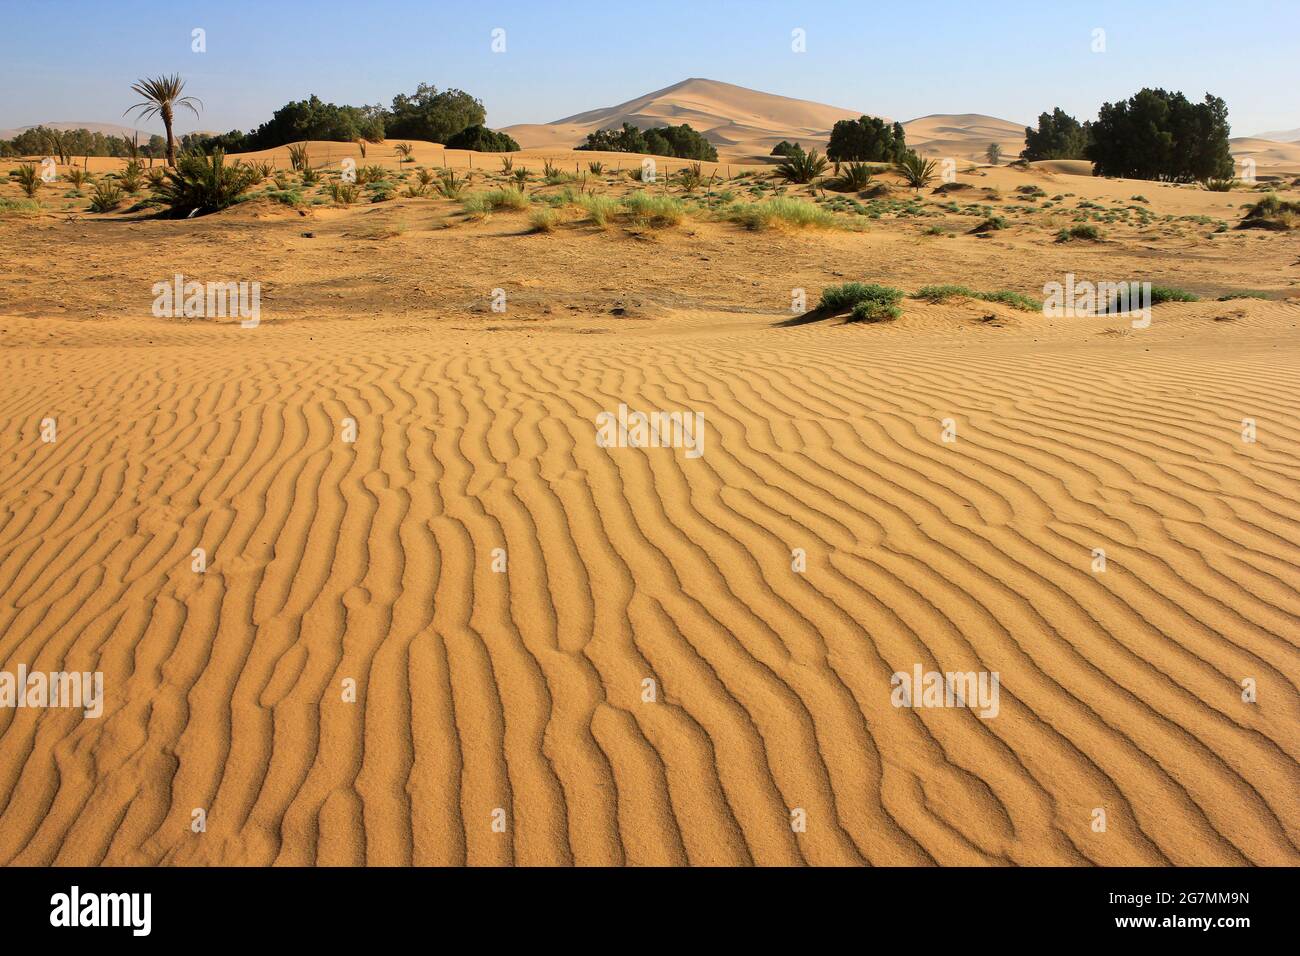 Sand Ripples With Erg Chebbi Dunes In Distance, Merzouga, Morocco Stock Photo